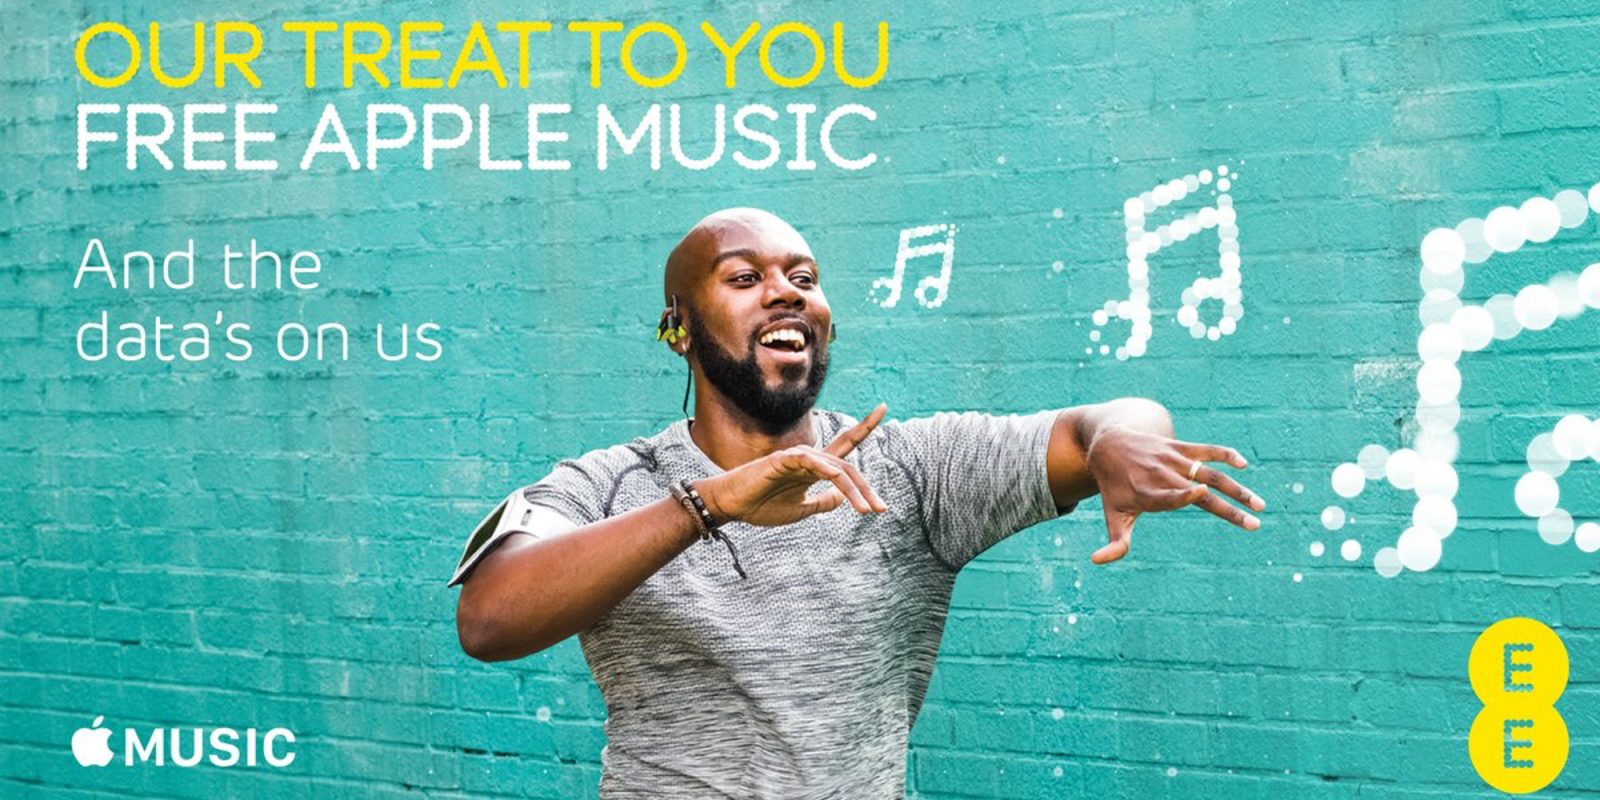 Free 6-month Apple Music Trial for EE Customers Starting July 19th